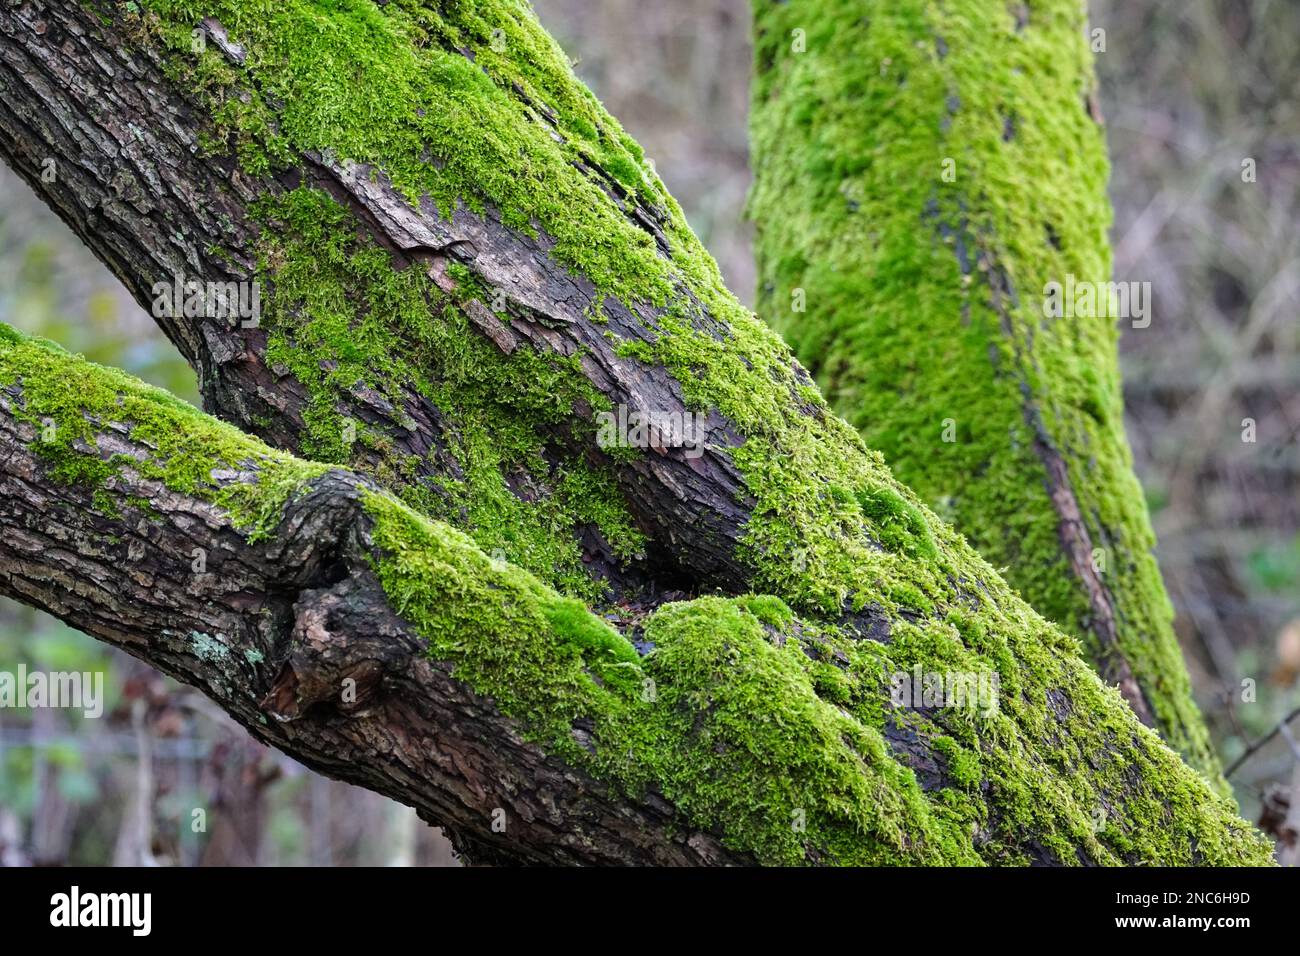 Tree branches covered with green moss Stock Photo